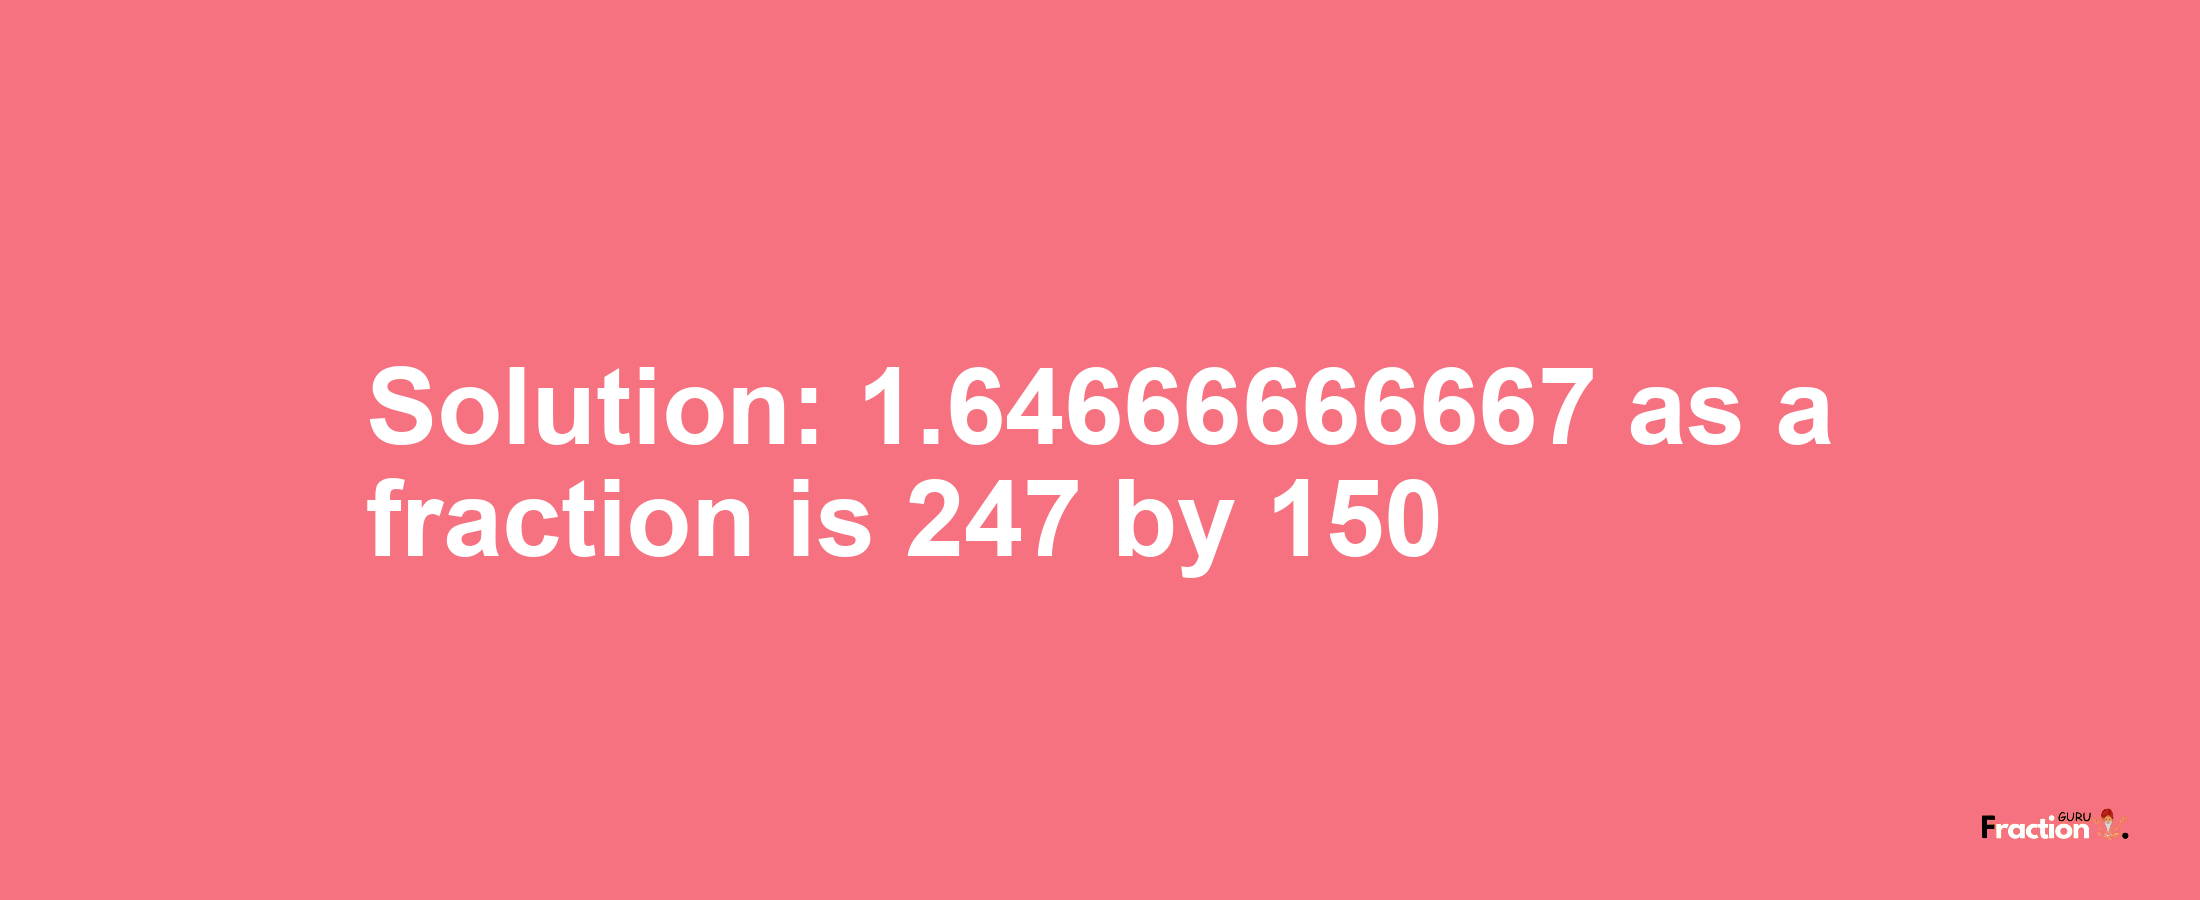 Solution:1.64666666667 as a fraction is 247/150